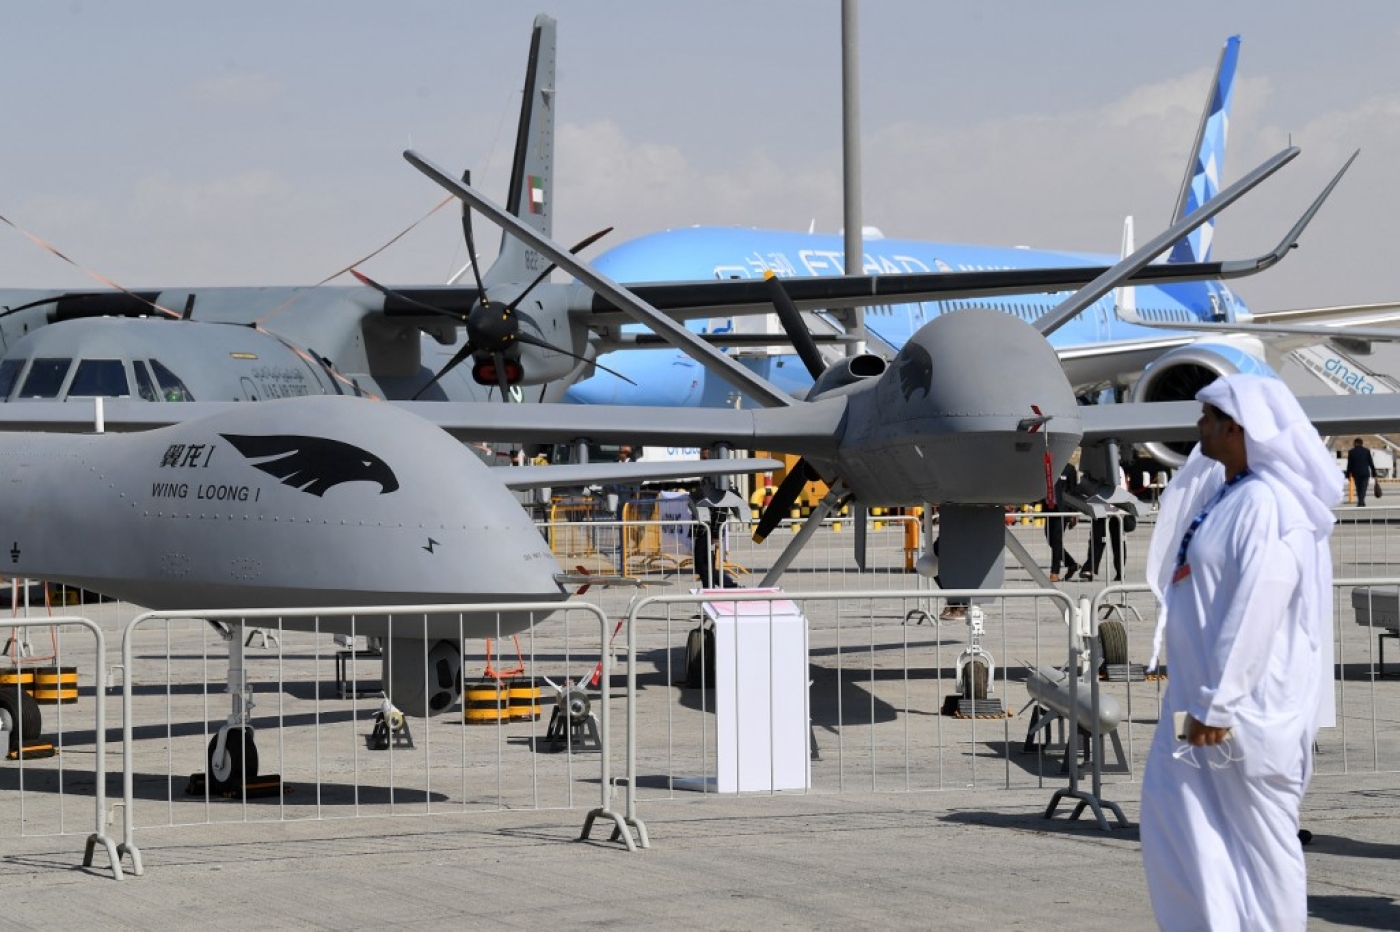 Chinese-made Wing Loong II drones 